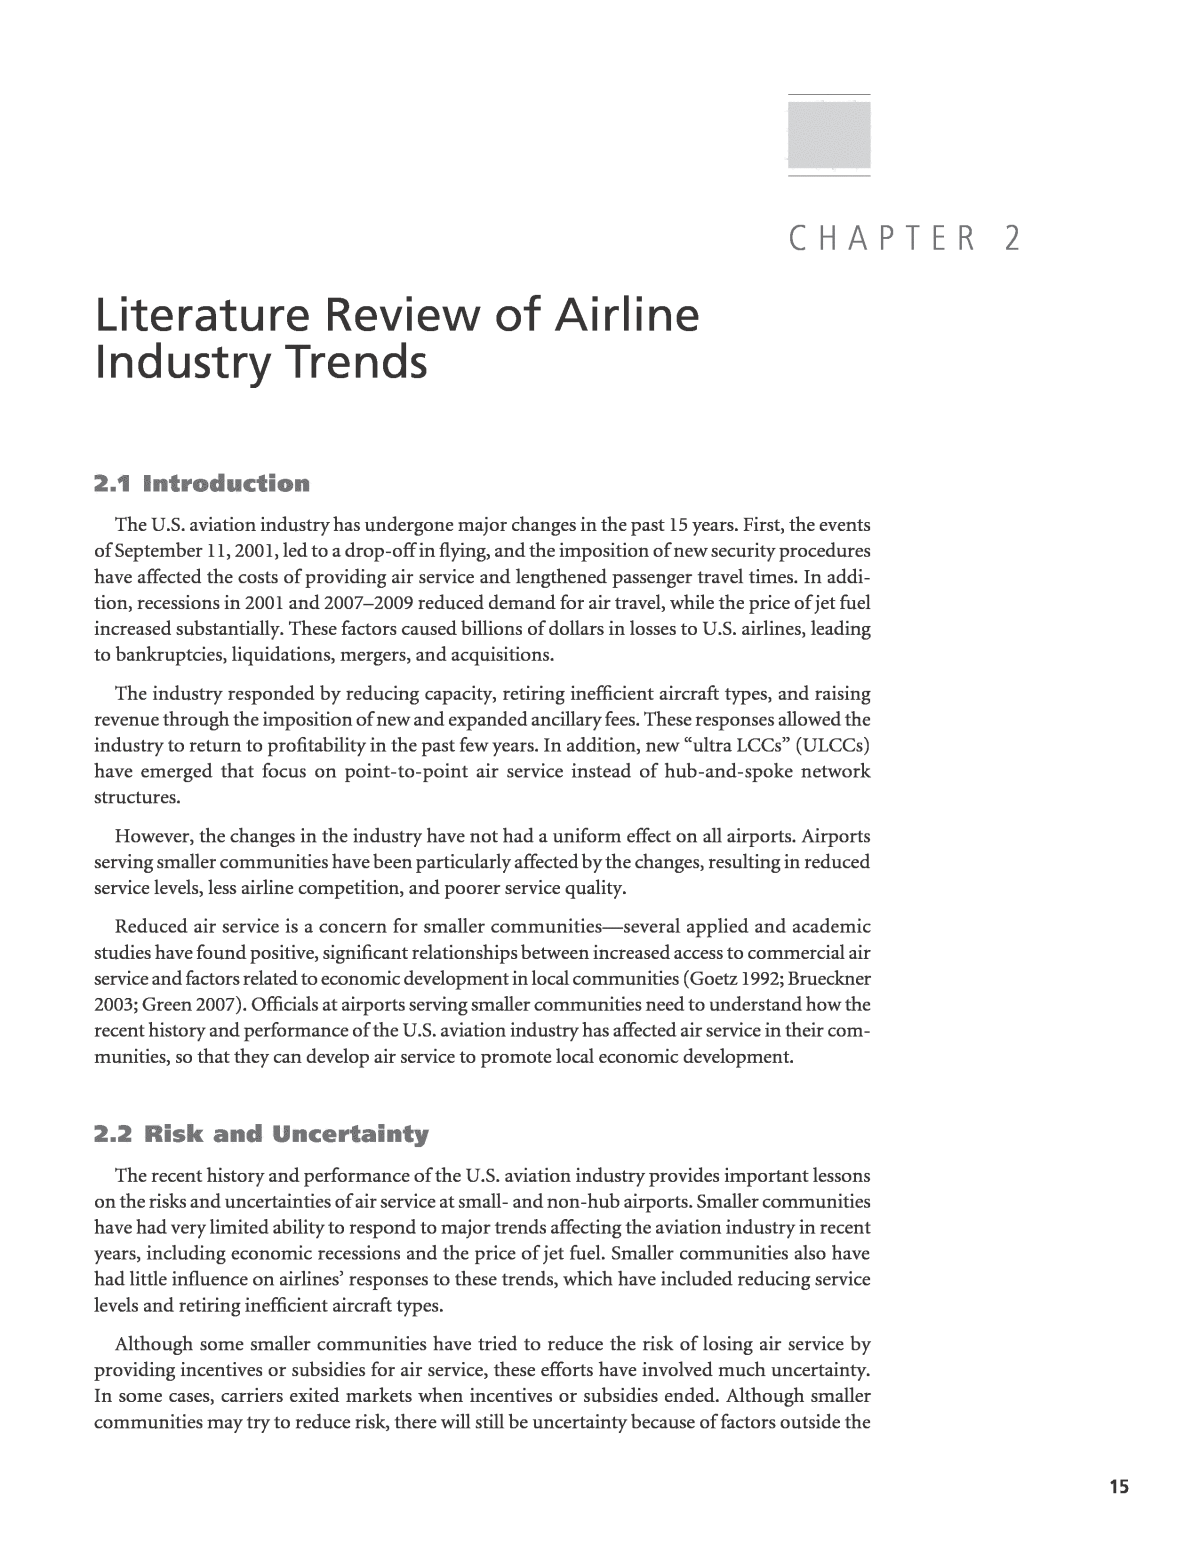 Review of related literature for ordering system